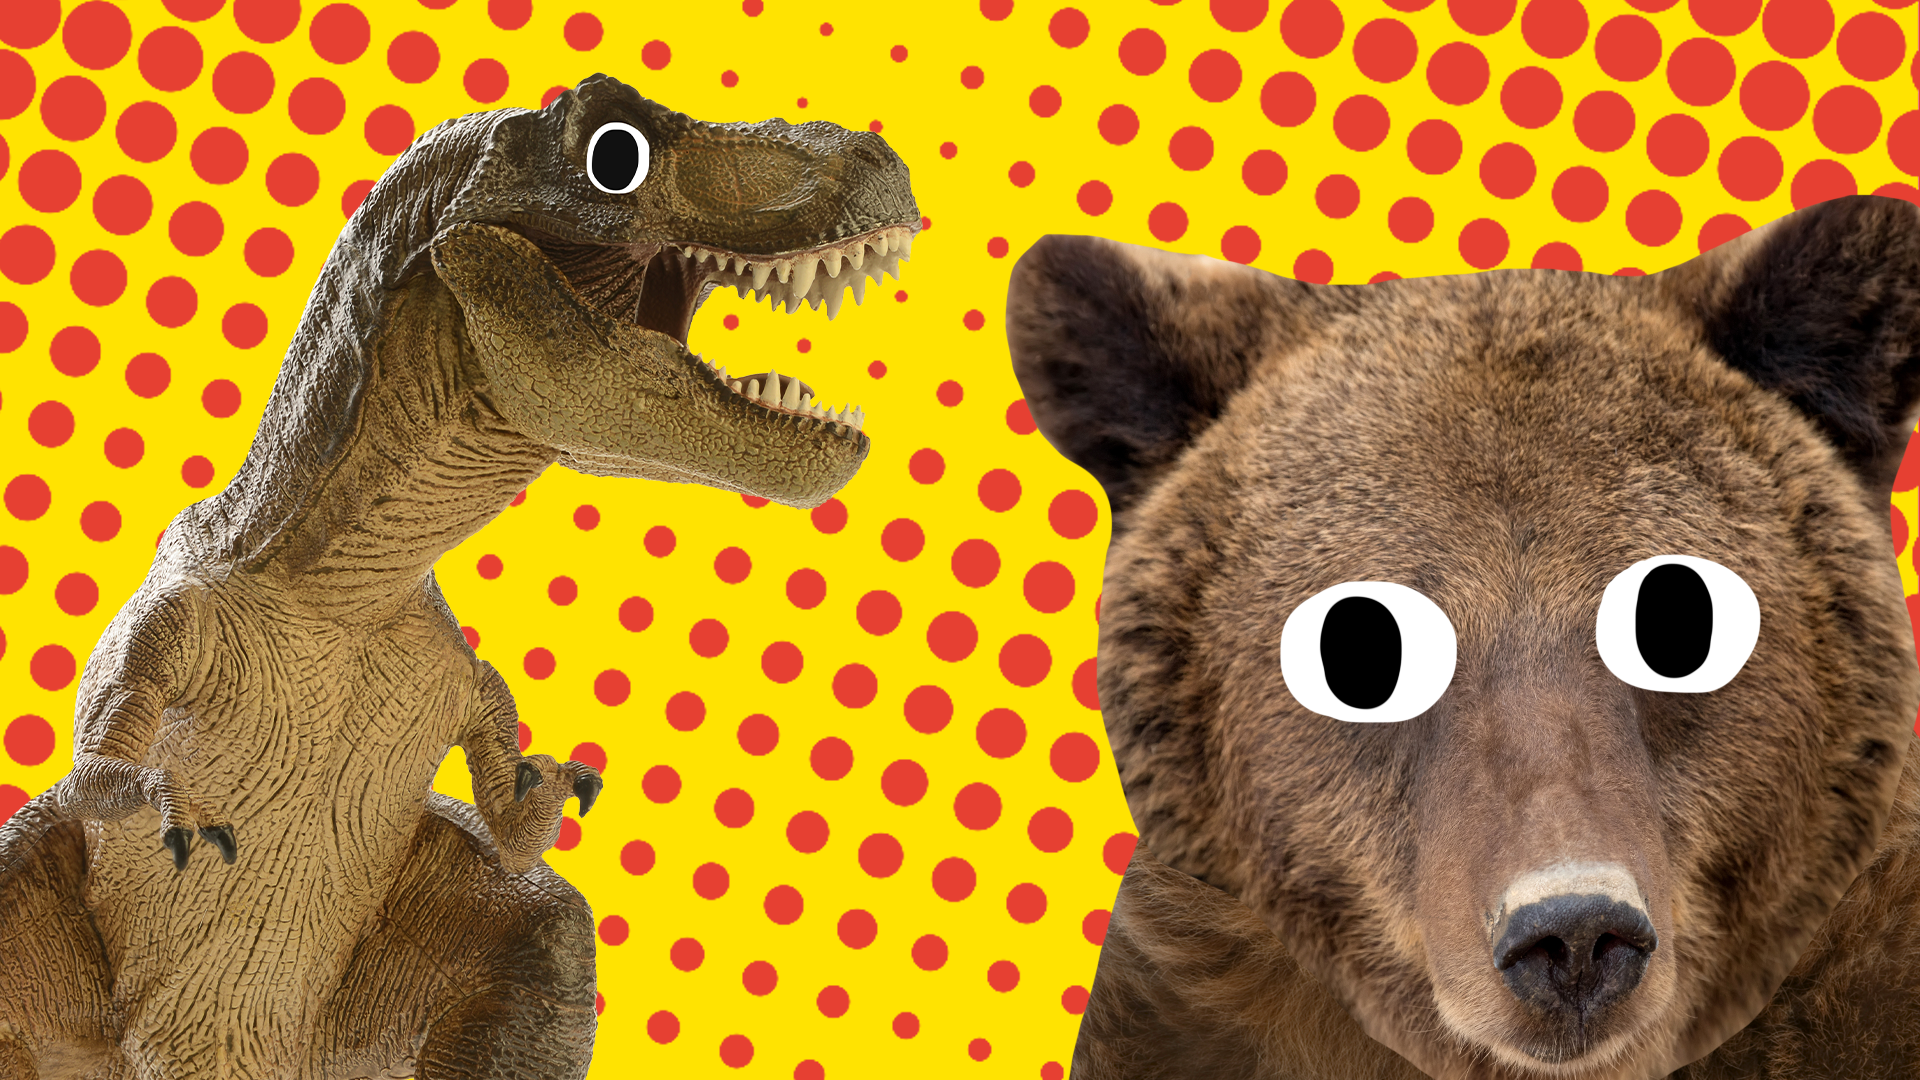 Beano bear and dinosaur on red and yellow background